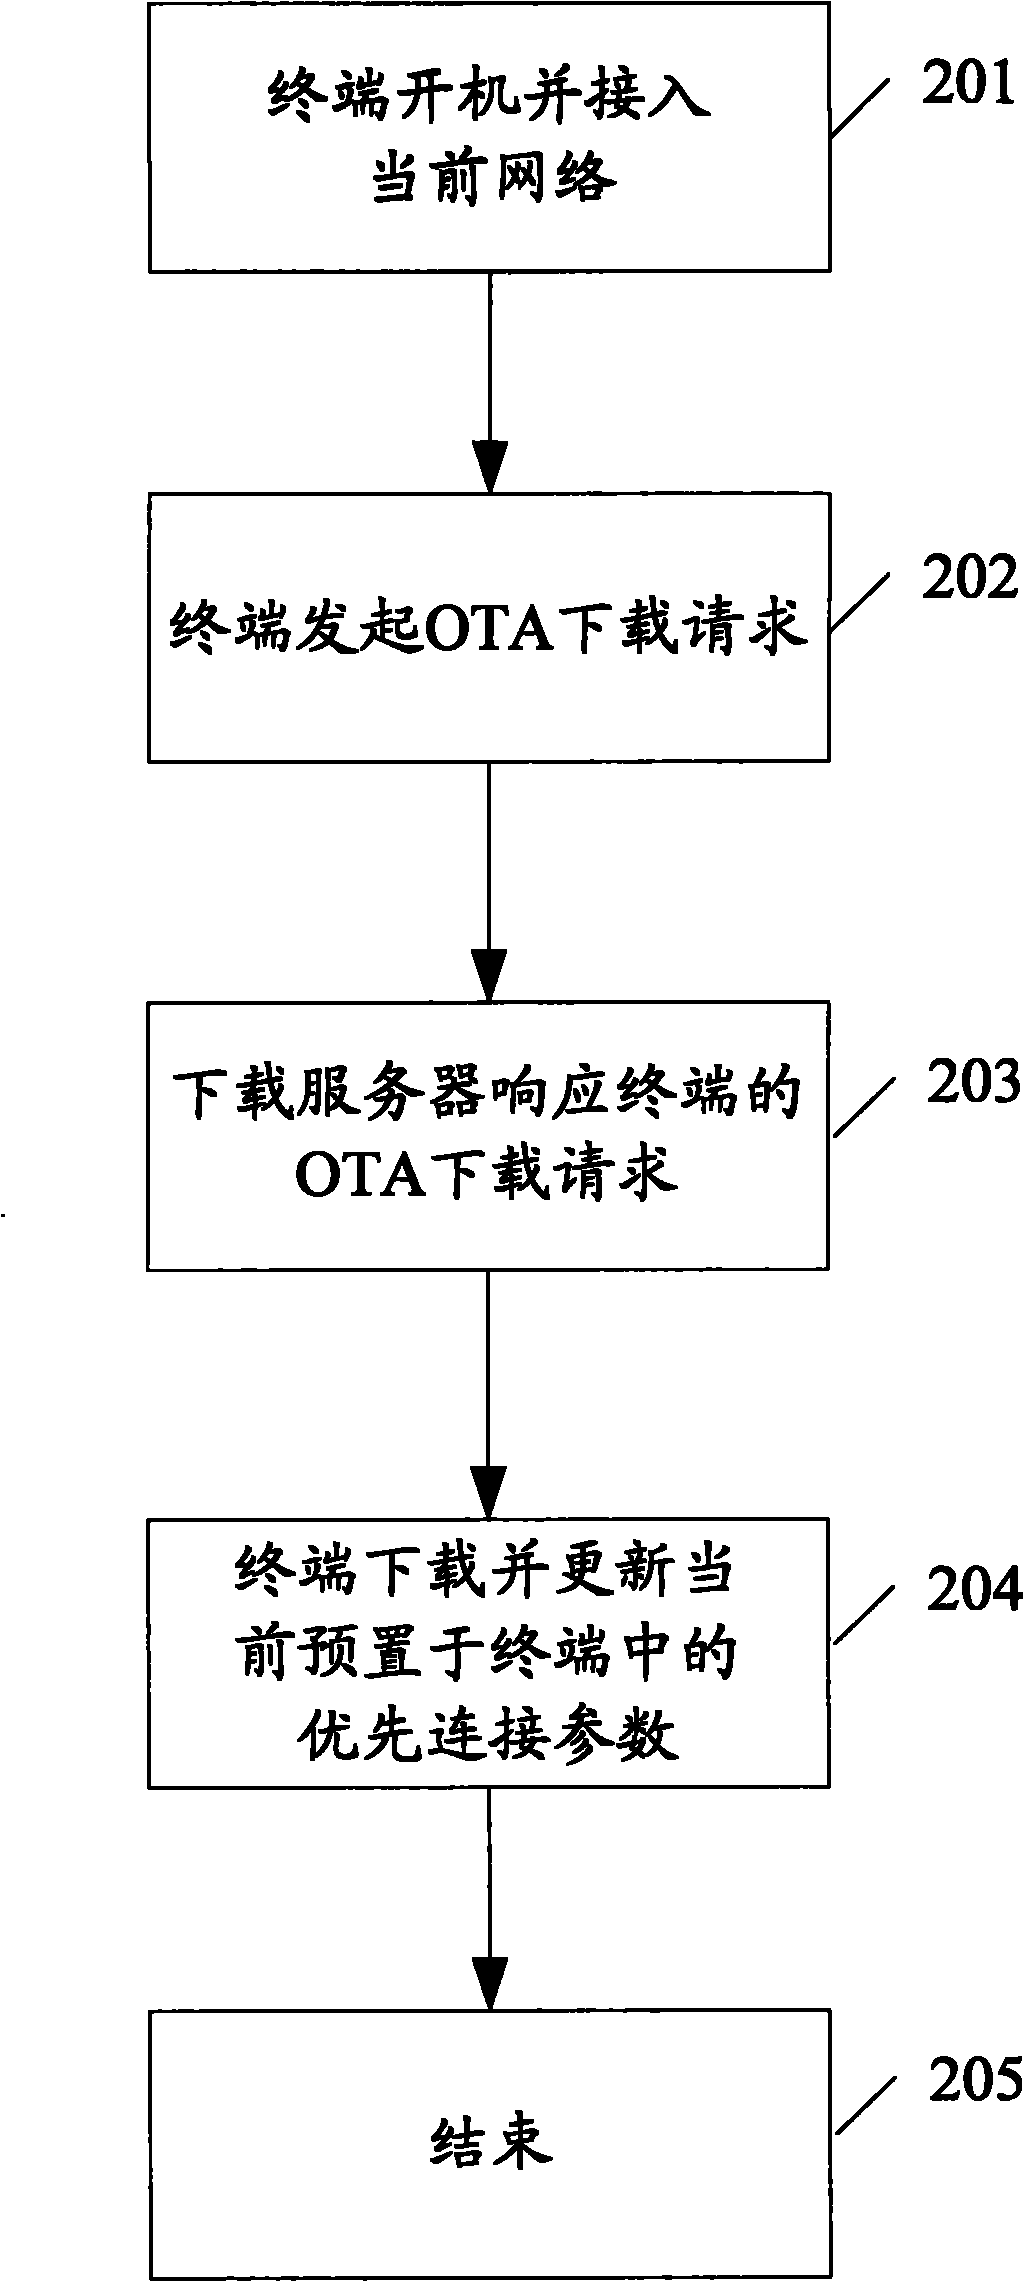 Method and system for connecting internet protocol version 4 (IPv4)/IPv6 dual-stack terminal with network